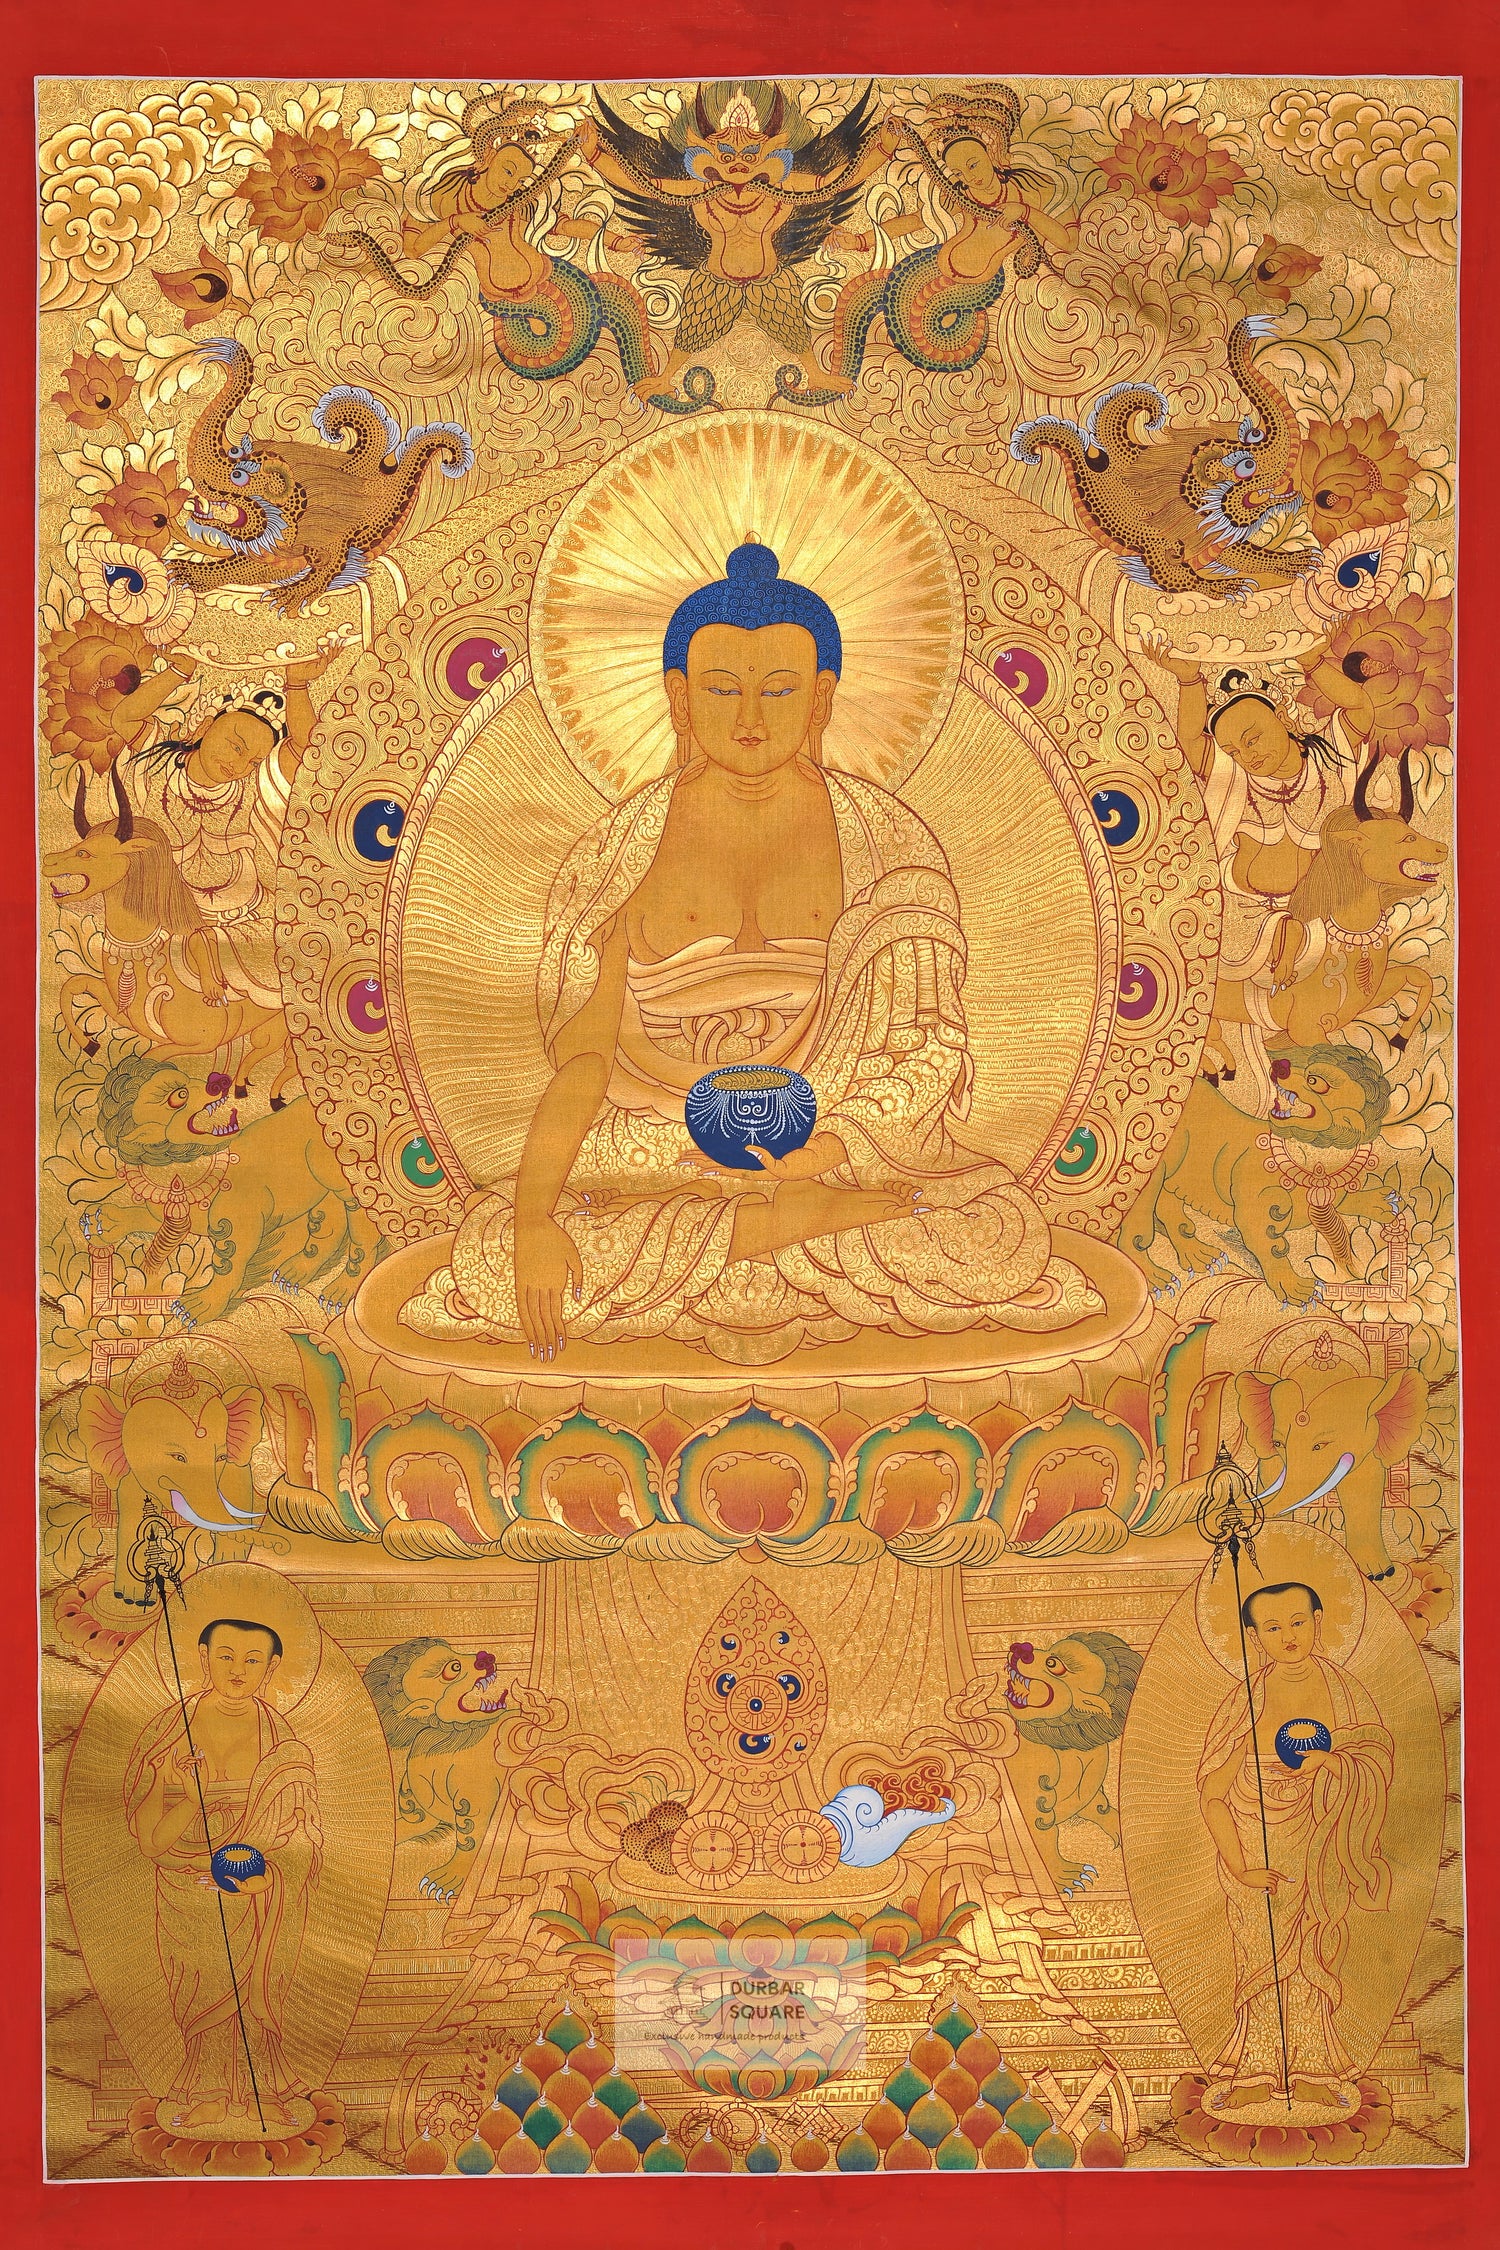 Own Thangka paintings, "the miracle of Buddhist culture"